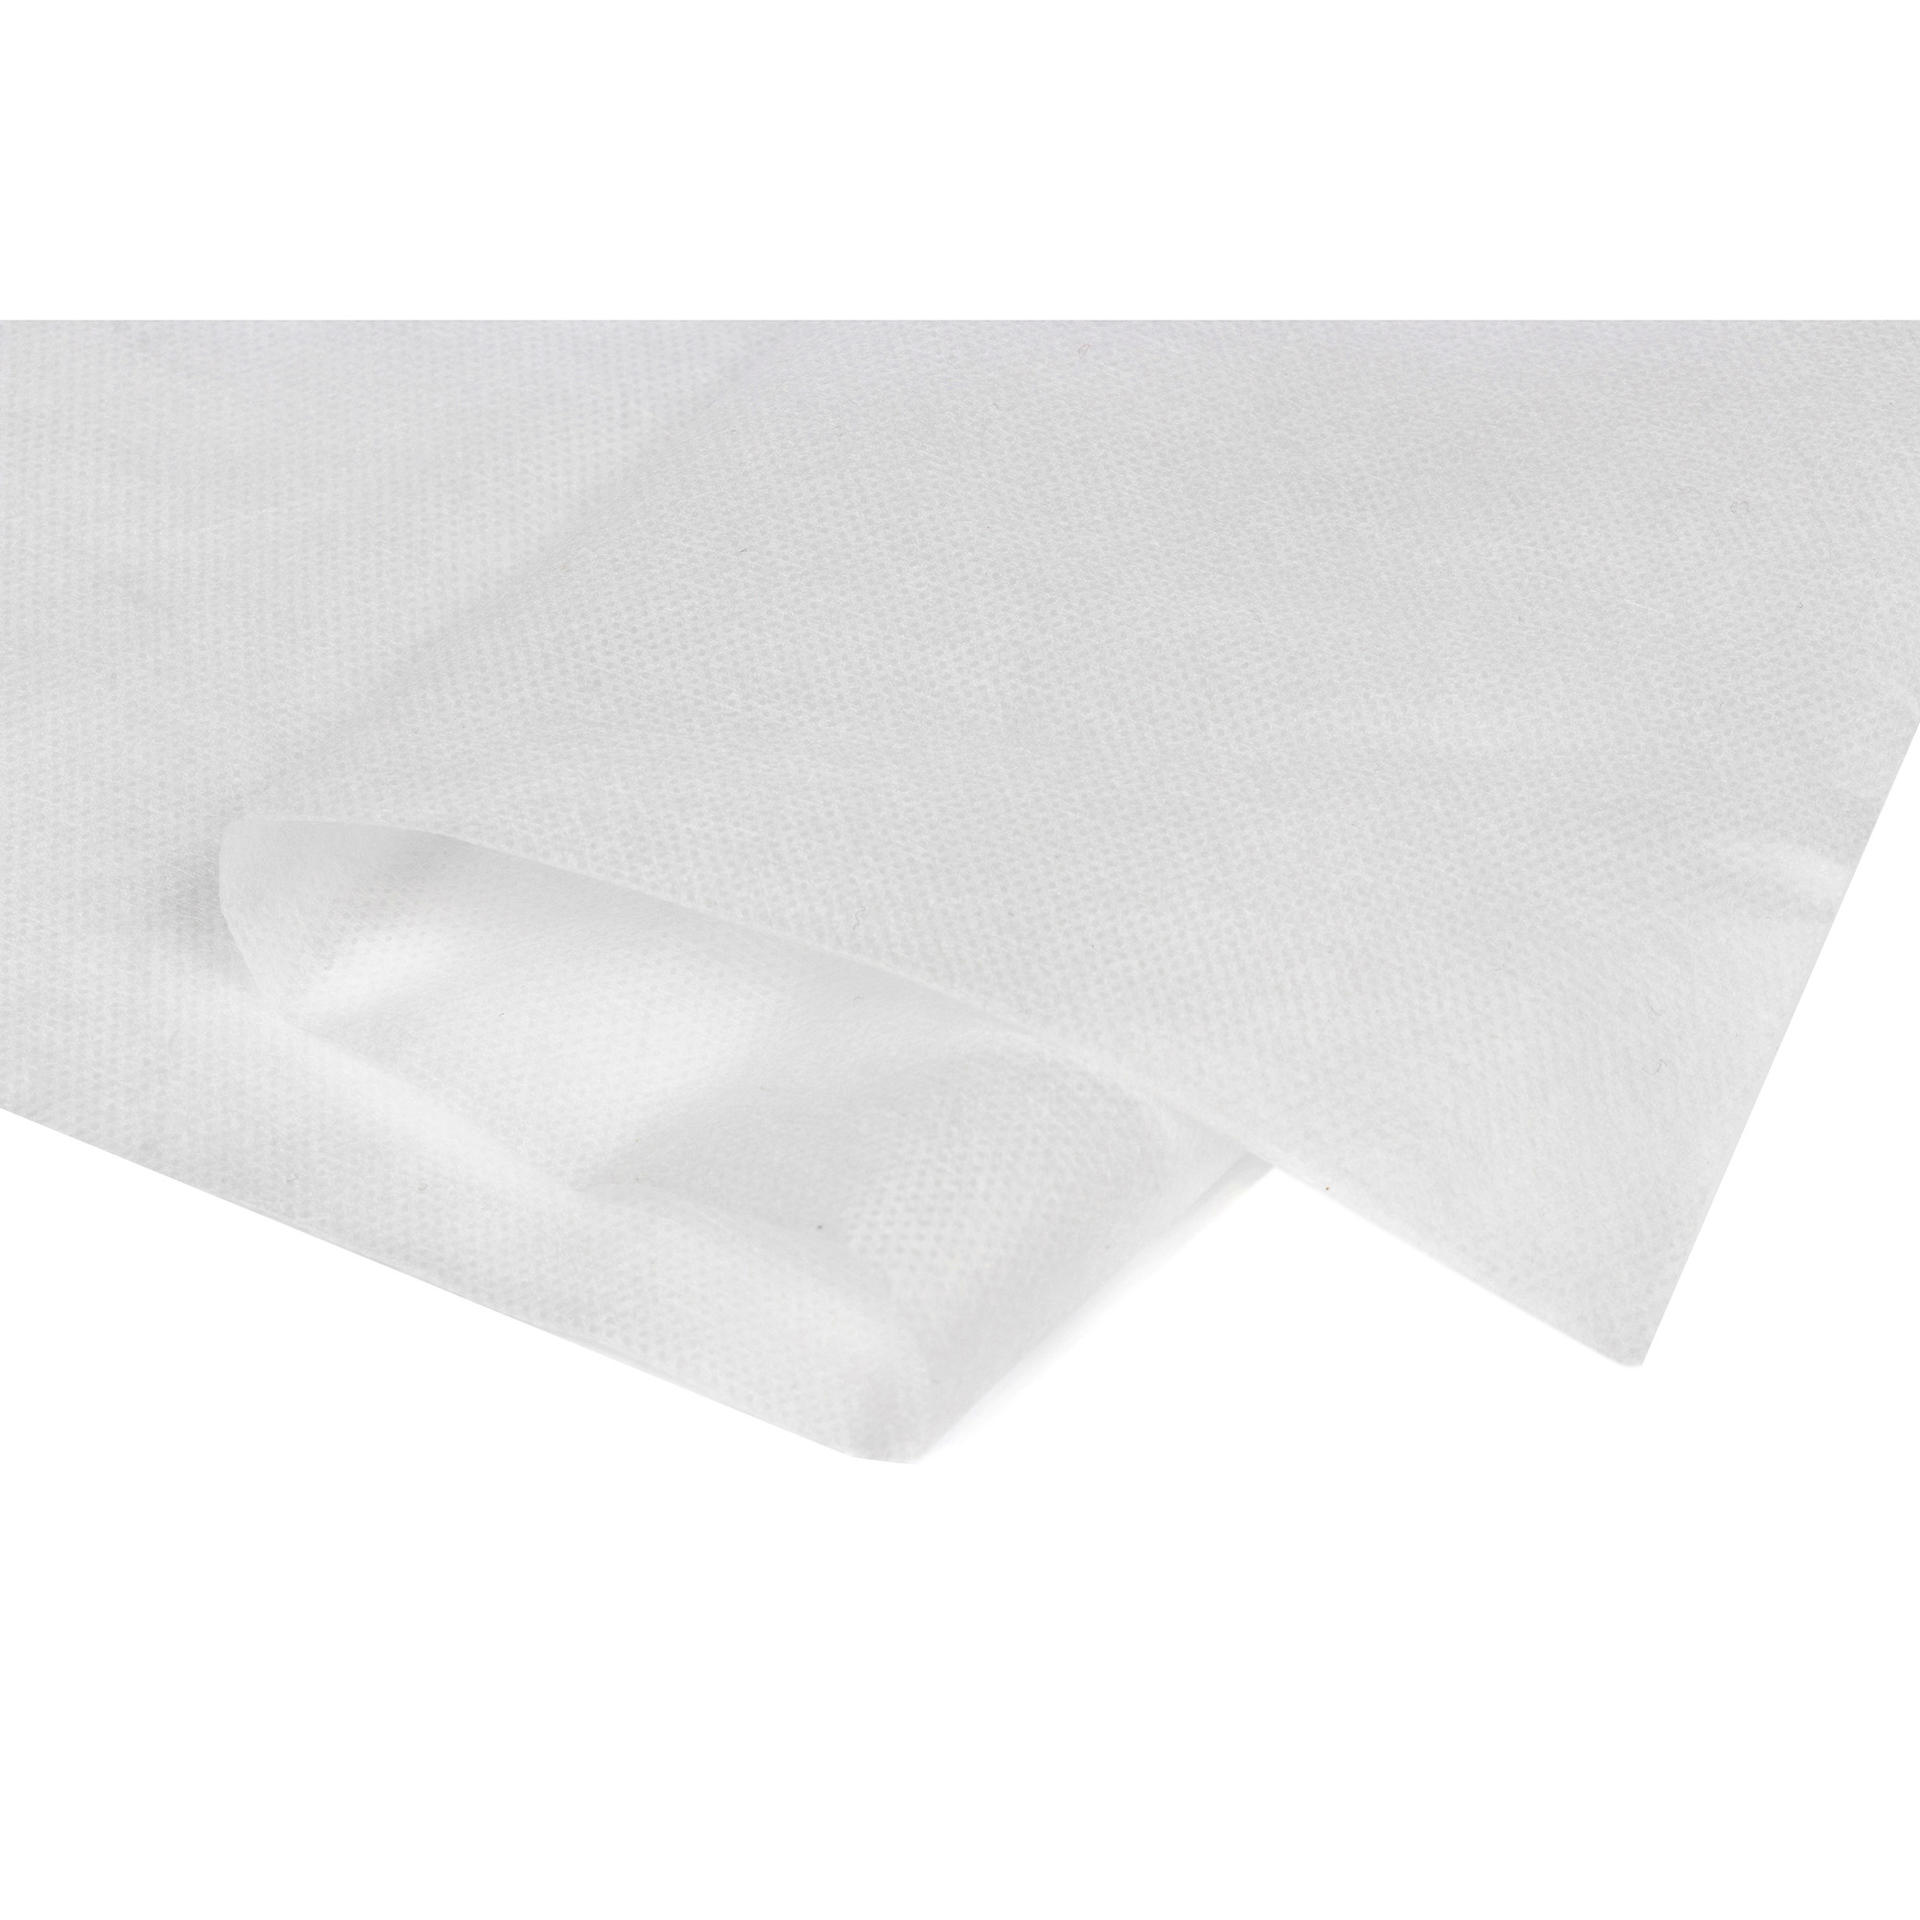 Breathable Medical Fabrics 100% PP Spunbonded Non Woven Fabric